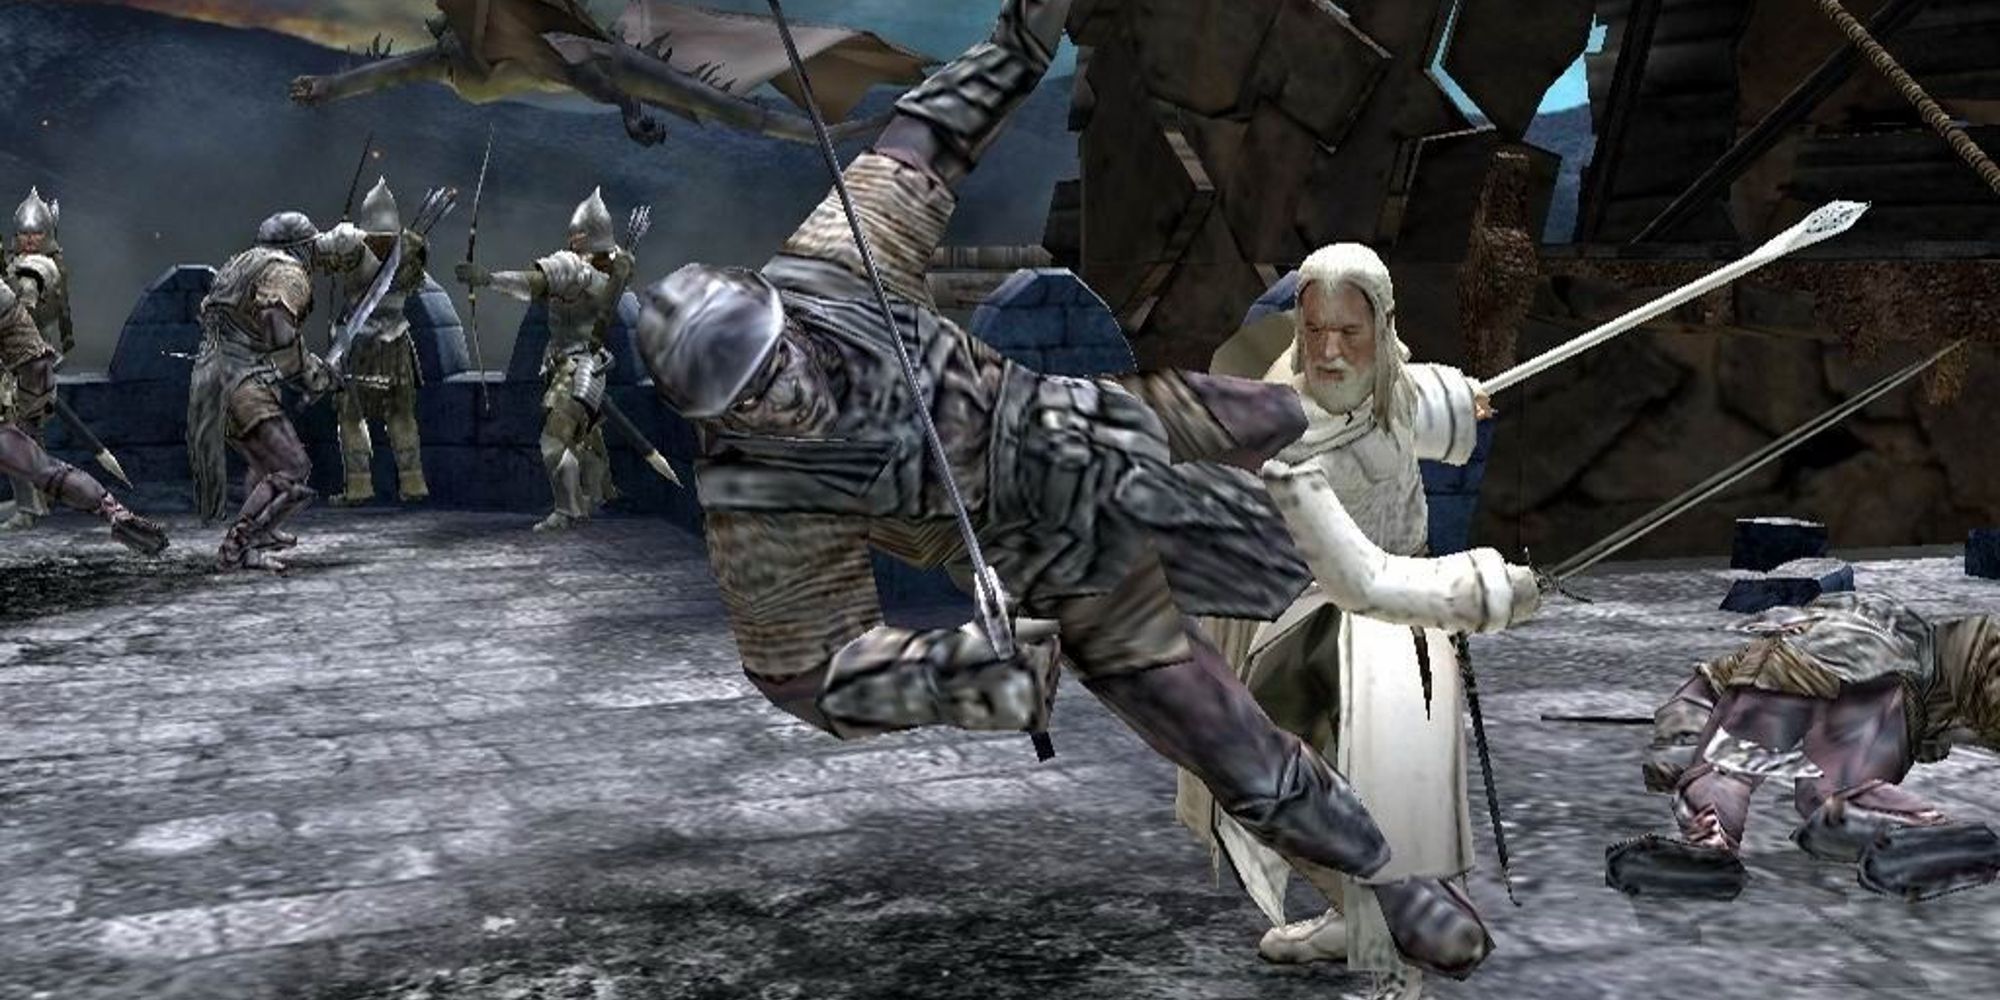 Gandalf fends off orcs in The Lord Of The Rings: The Return Of The King video game.